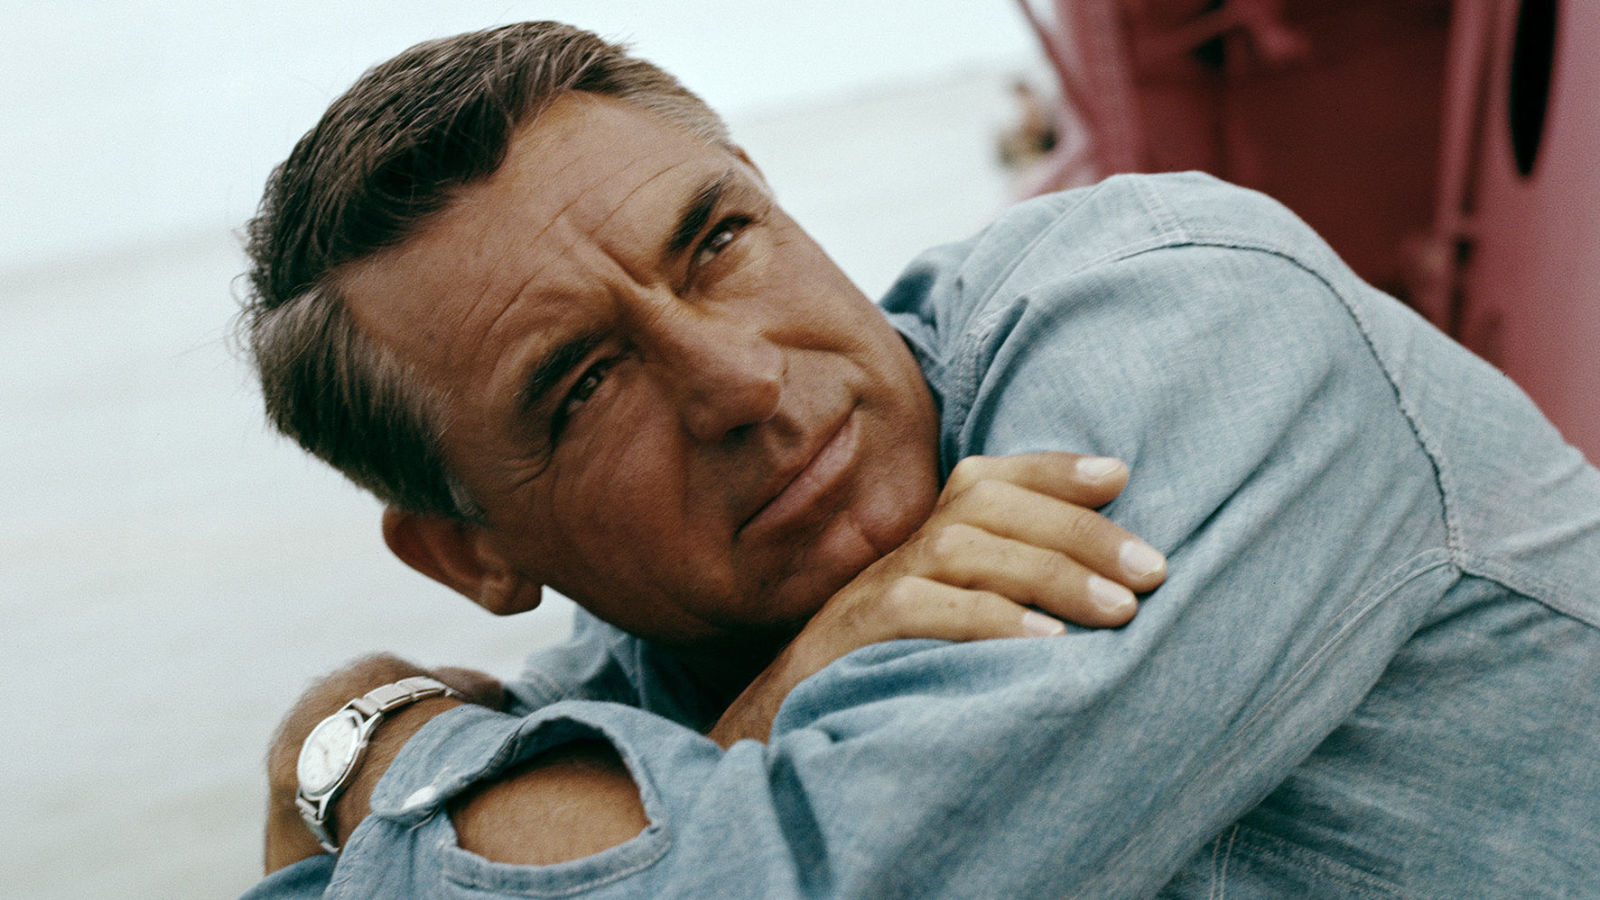 Cary Grant, daughter speaks out: 'My father didn't flirt with men'